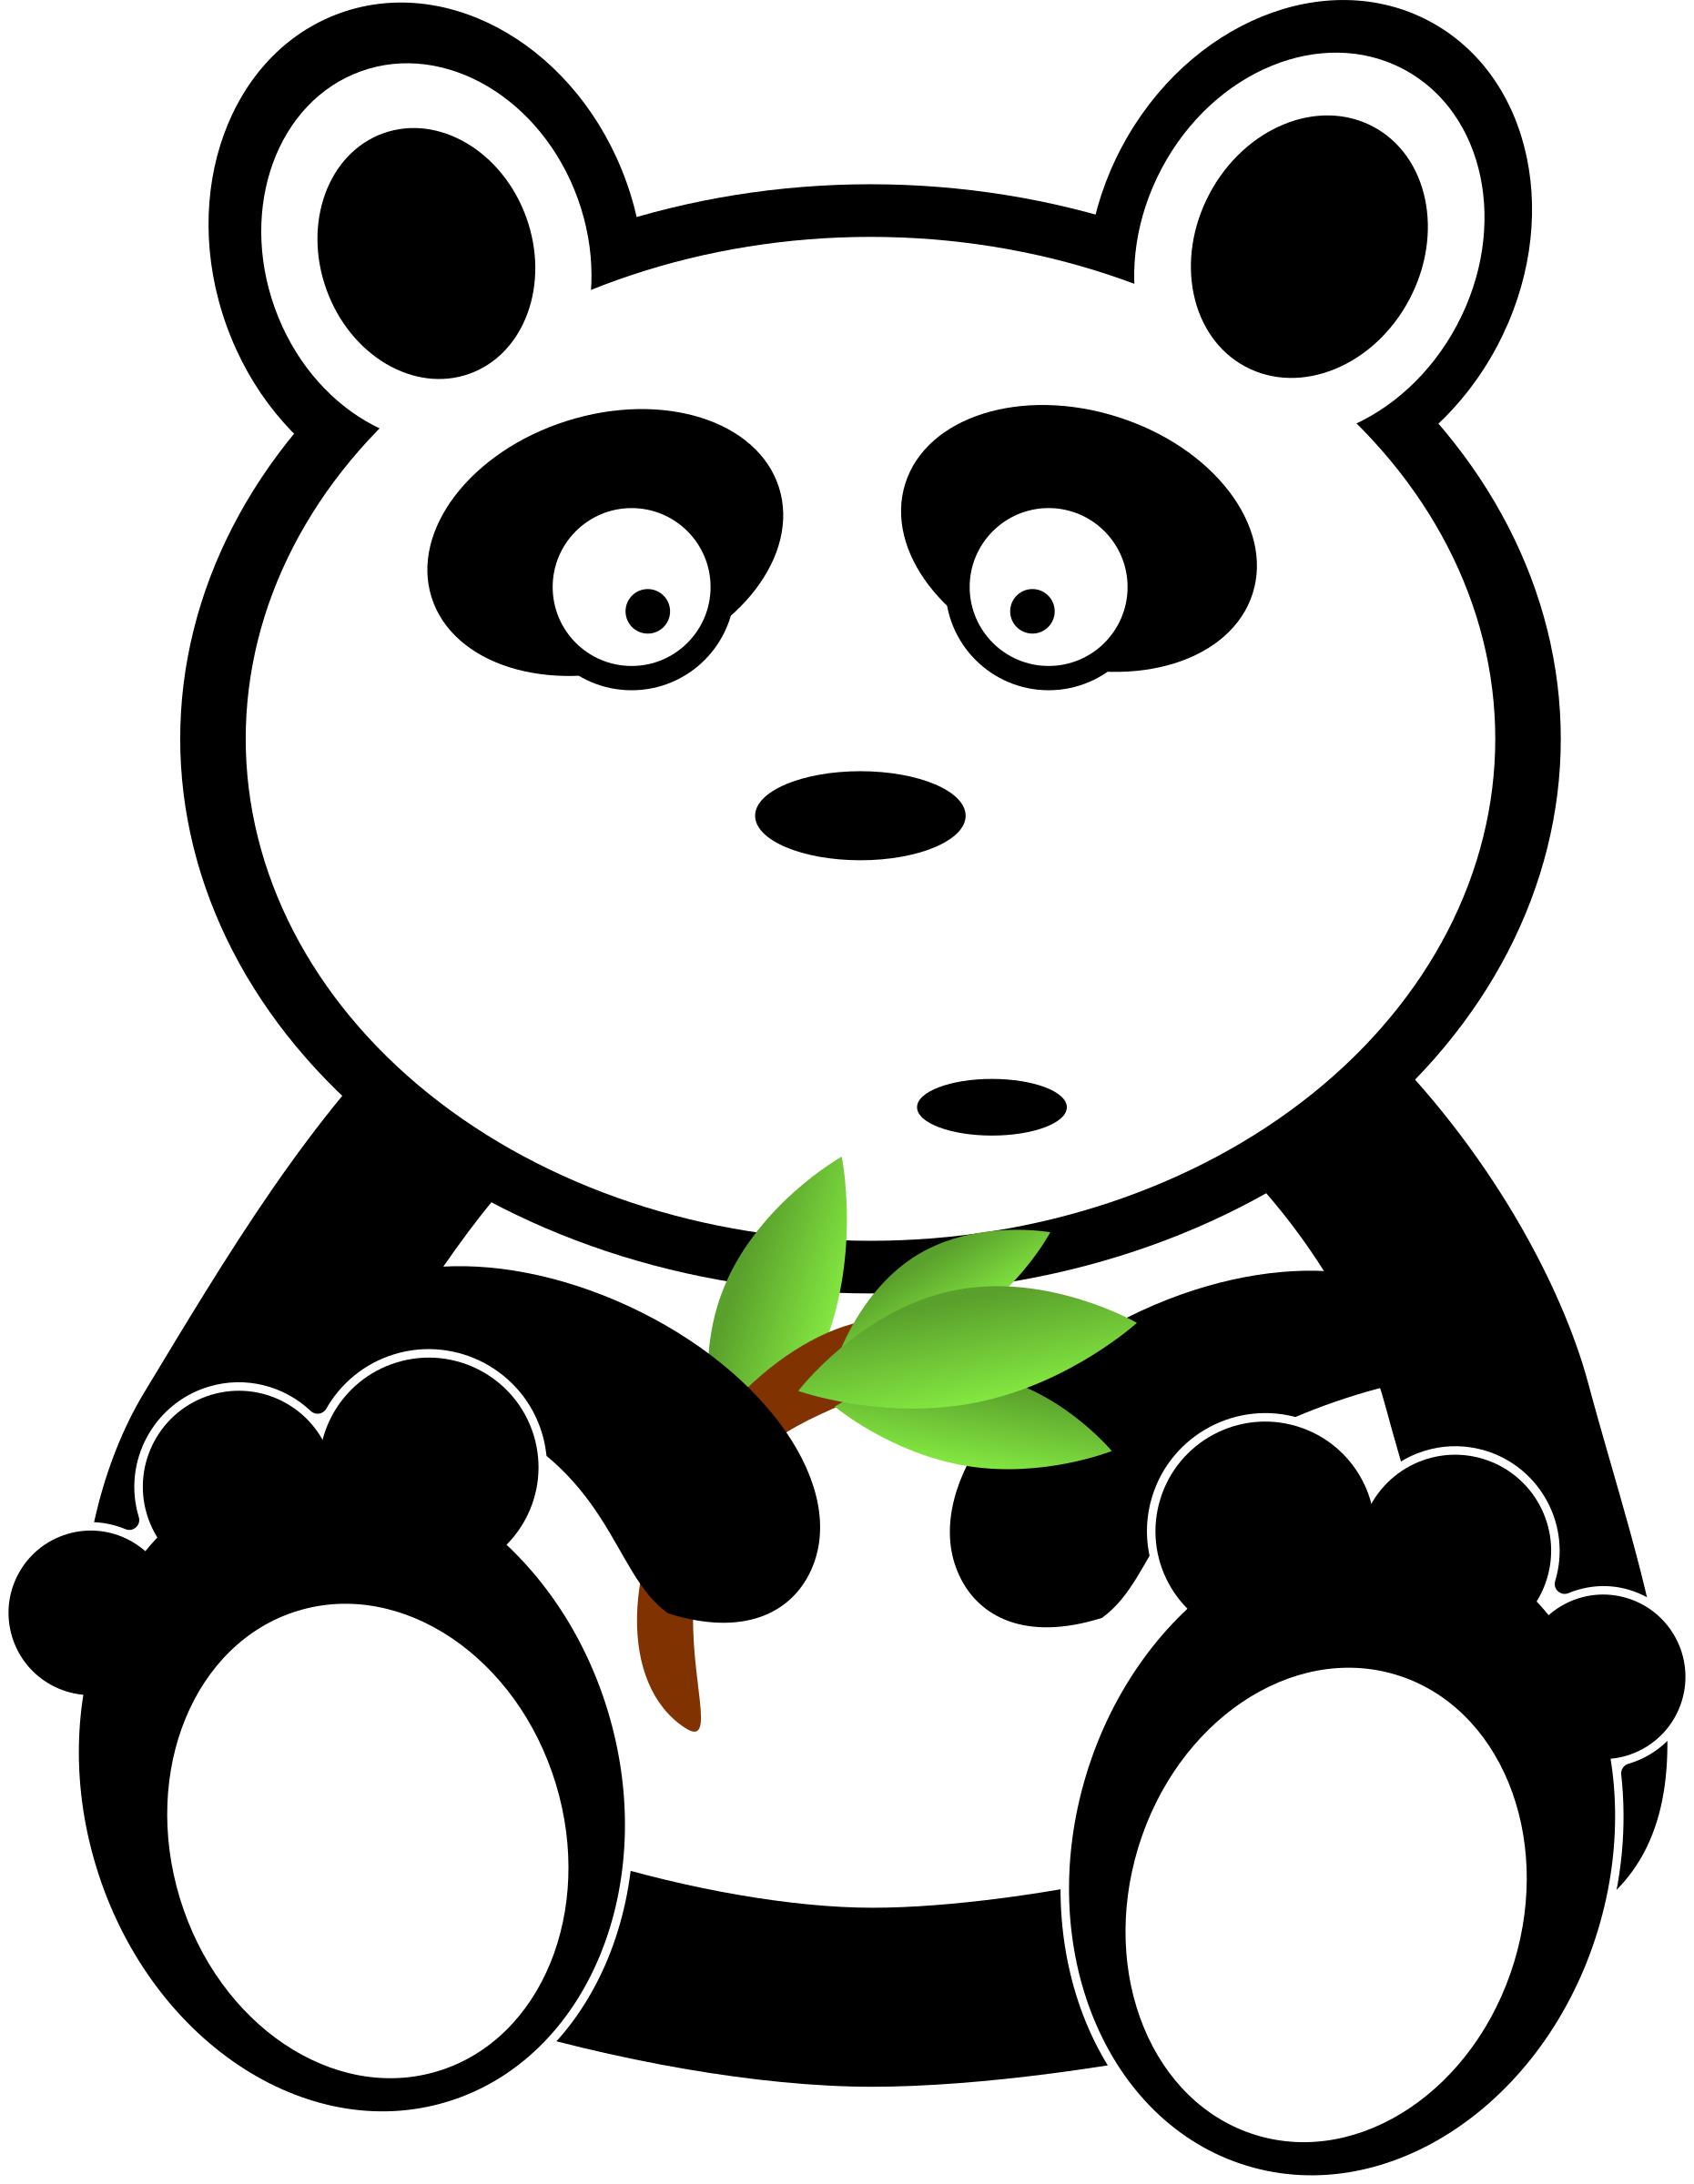 Panda with bamboo leaves png